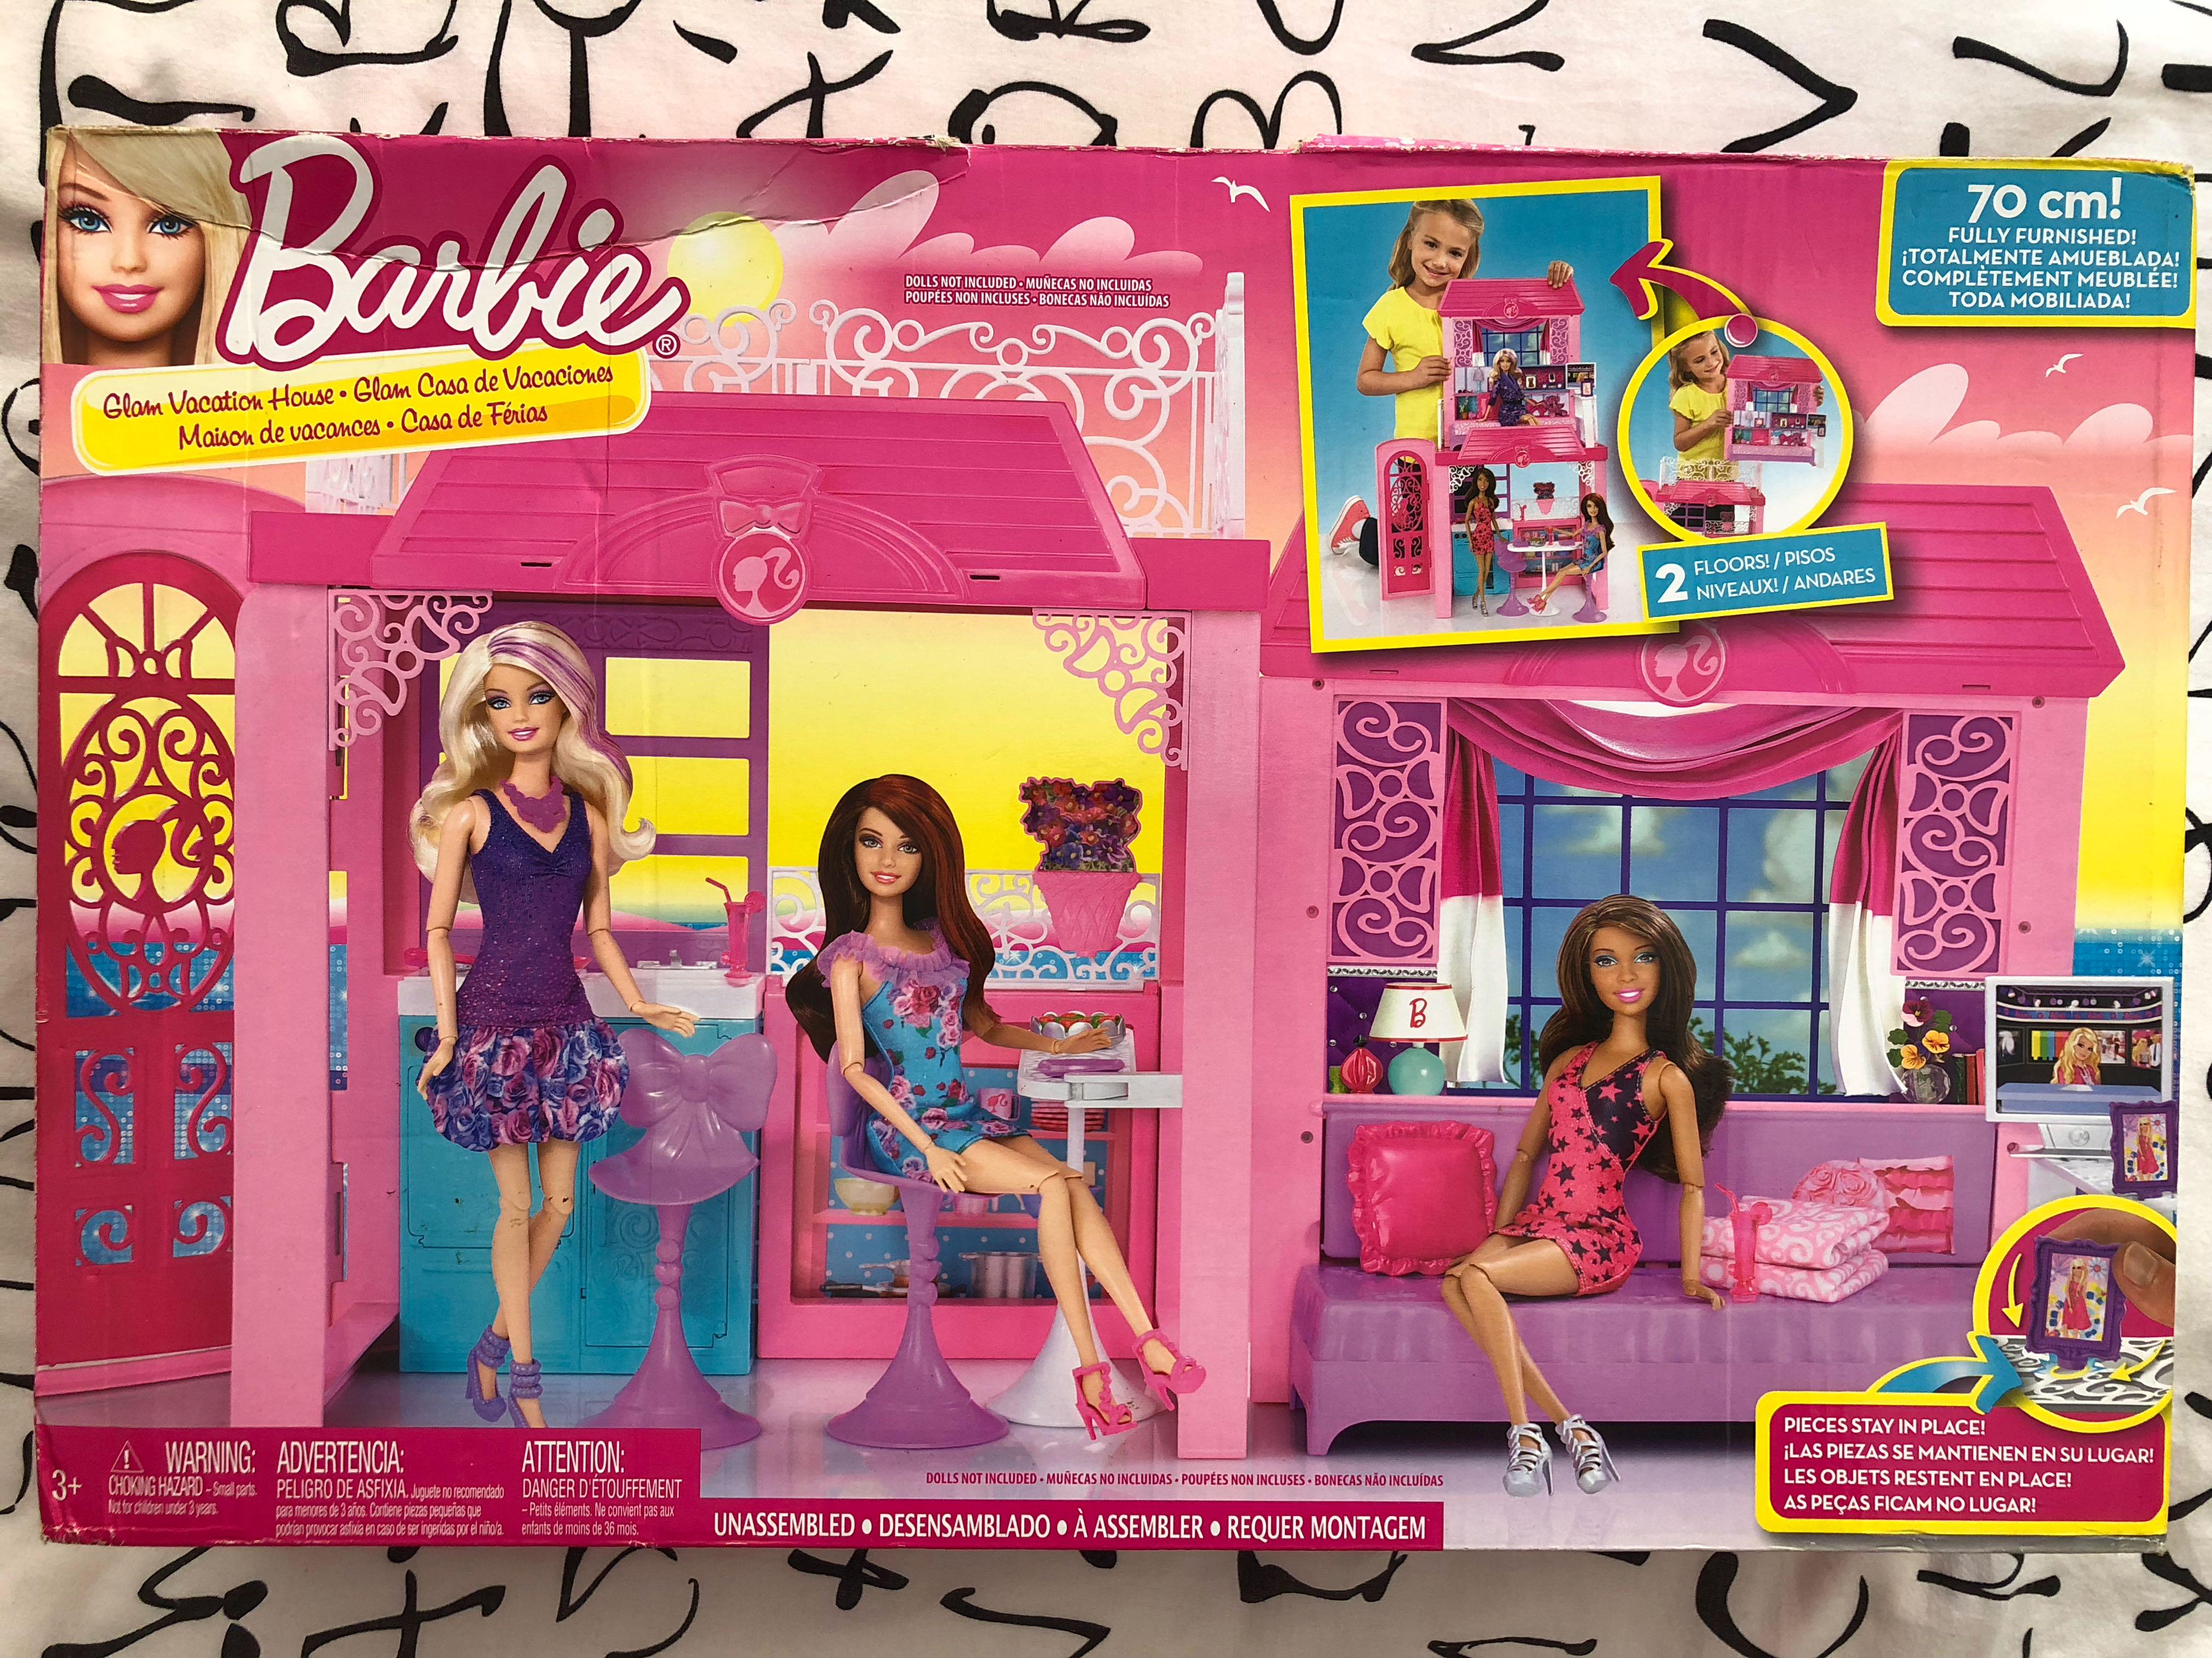 brand on barbie boxes